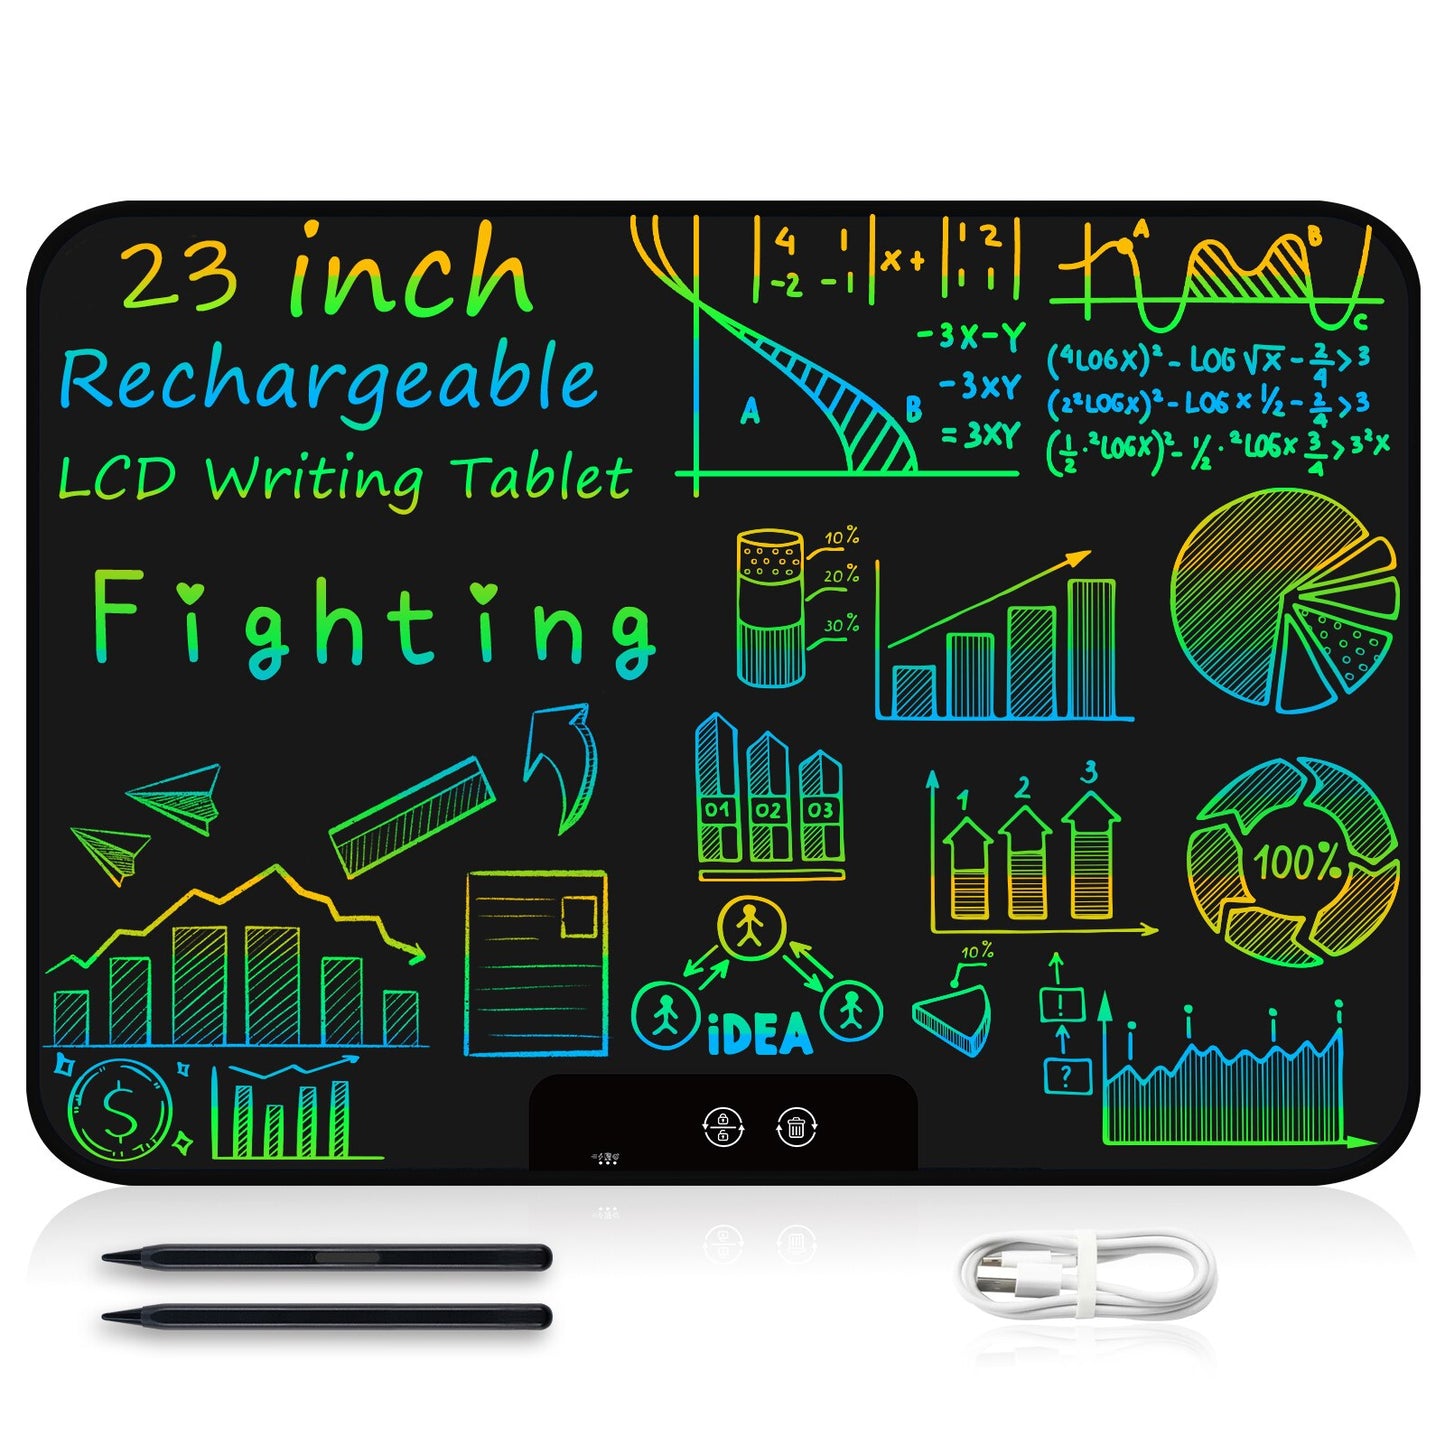 18 23 Inch LCD Writing Drawing Tablet Rechargeable Digital Colorful Graphics Handwriting Pad Kid Portable Electronic Sketchpad